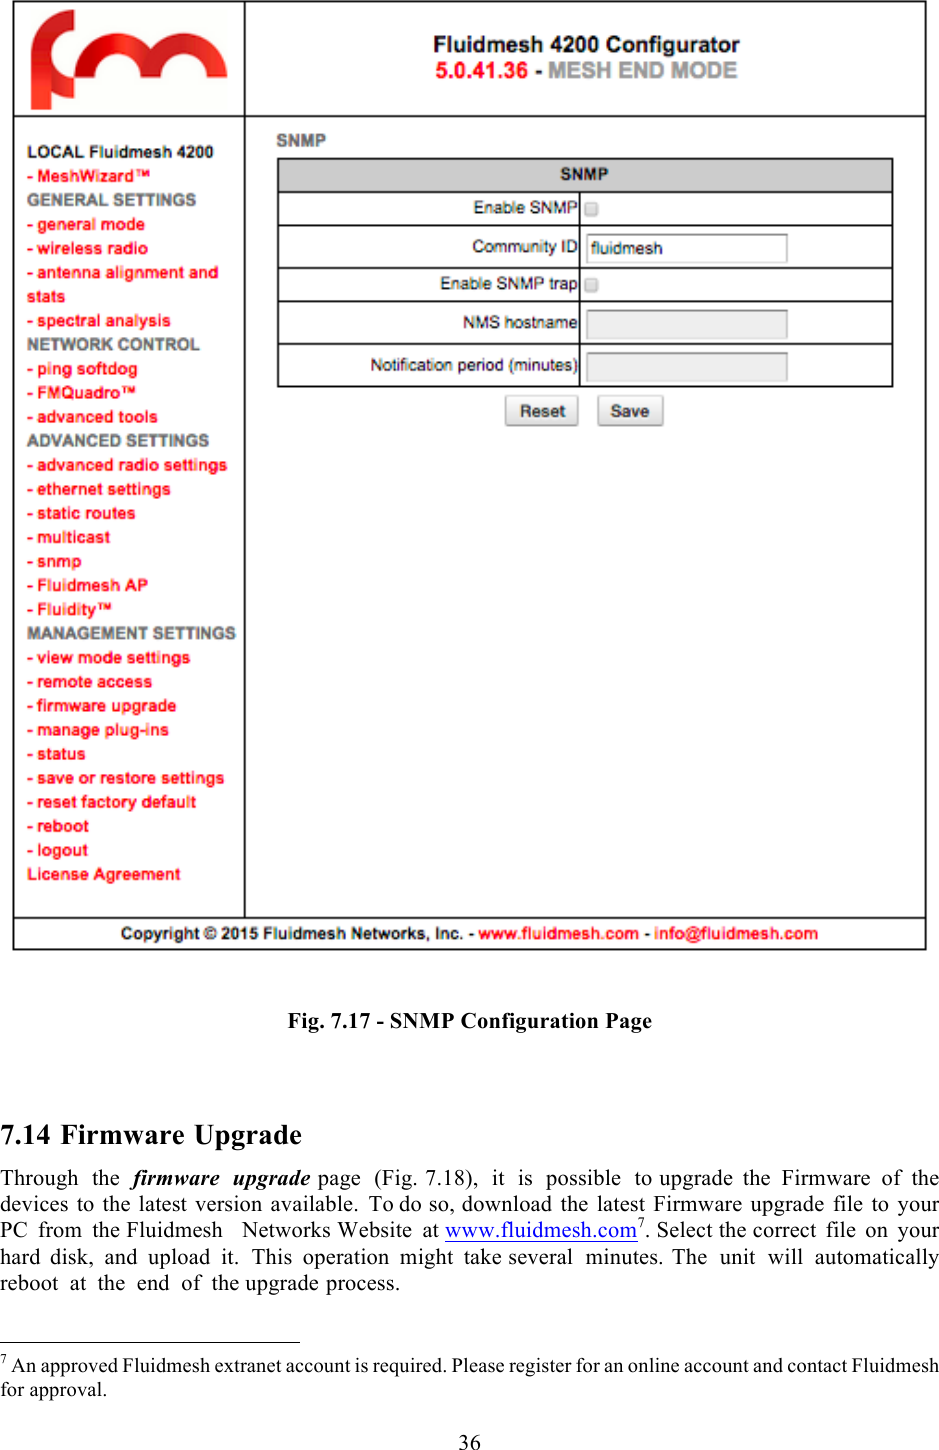  36      Fig. 7.17 - SNMP Configuration Page  7.14 Firmware Upgrade Through the firmware upgrade page  (Fig. 7.18), it is possible to upgrade the Firmware of the devices to the latest version available. To do so, download the latest Firmware upgrade file to your PC from the Fluidmesh   Networks Website at www.fluidmesh.com7. Select the correct file on your hard disk, and upload it. This operation might take several minutes. The unit will automatically reboot at the end of the upgrade process.                                                          7 An approved Fluidmesh extranet account is required. Please register for an online account and contact Fluidmesh for approval. 